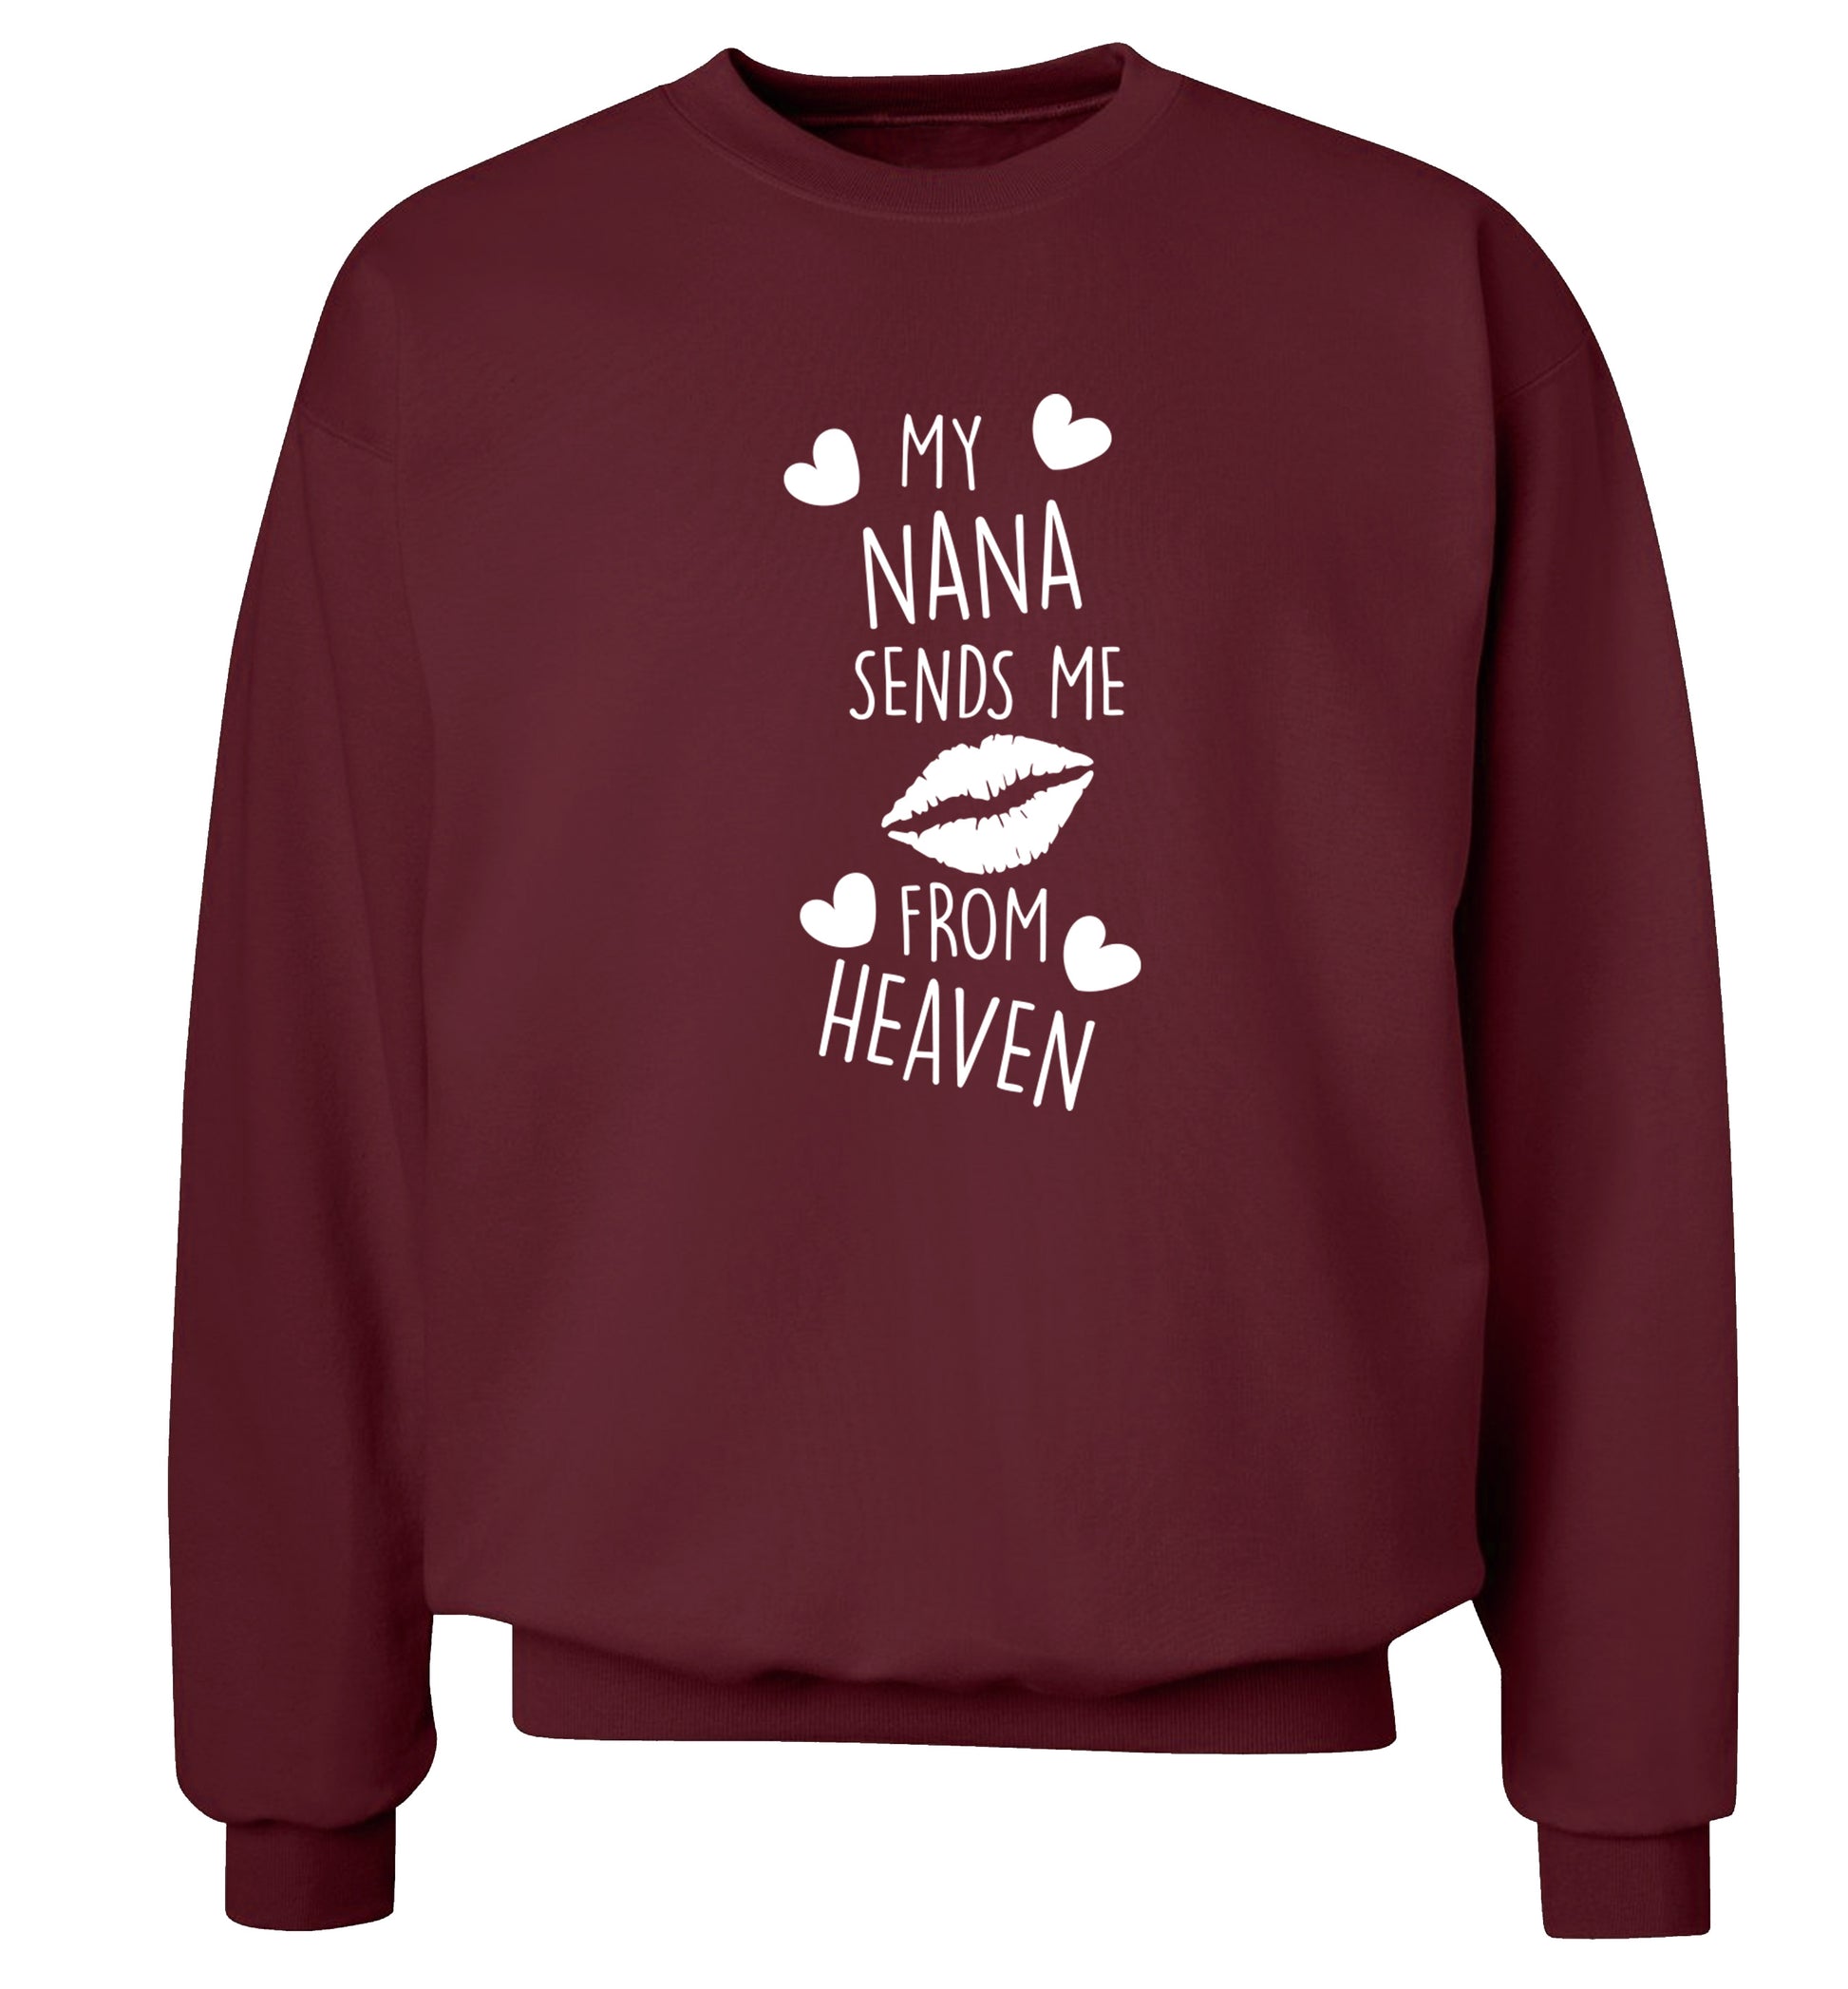 My nana sends me kisses from heaven Adult's unisex maroon Sweater 2XL